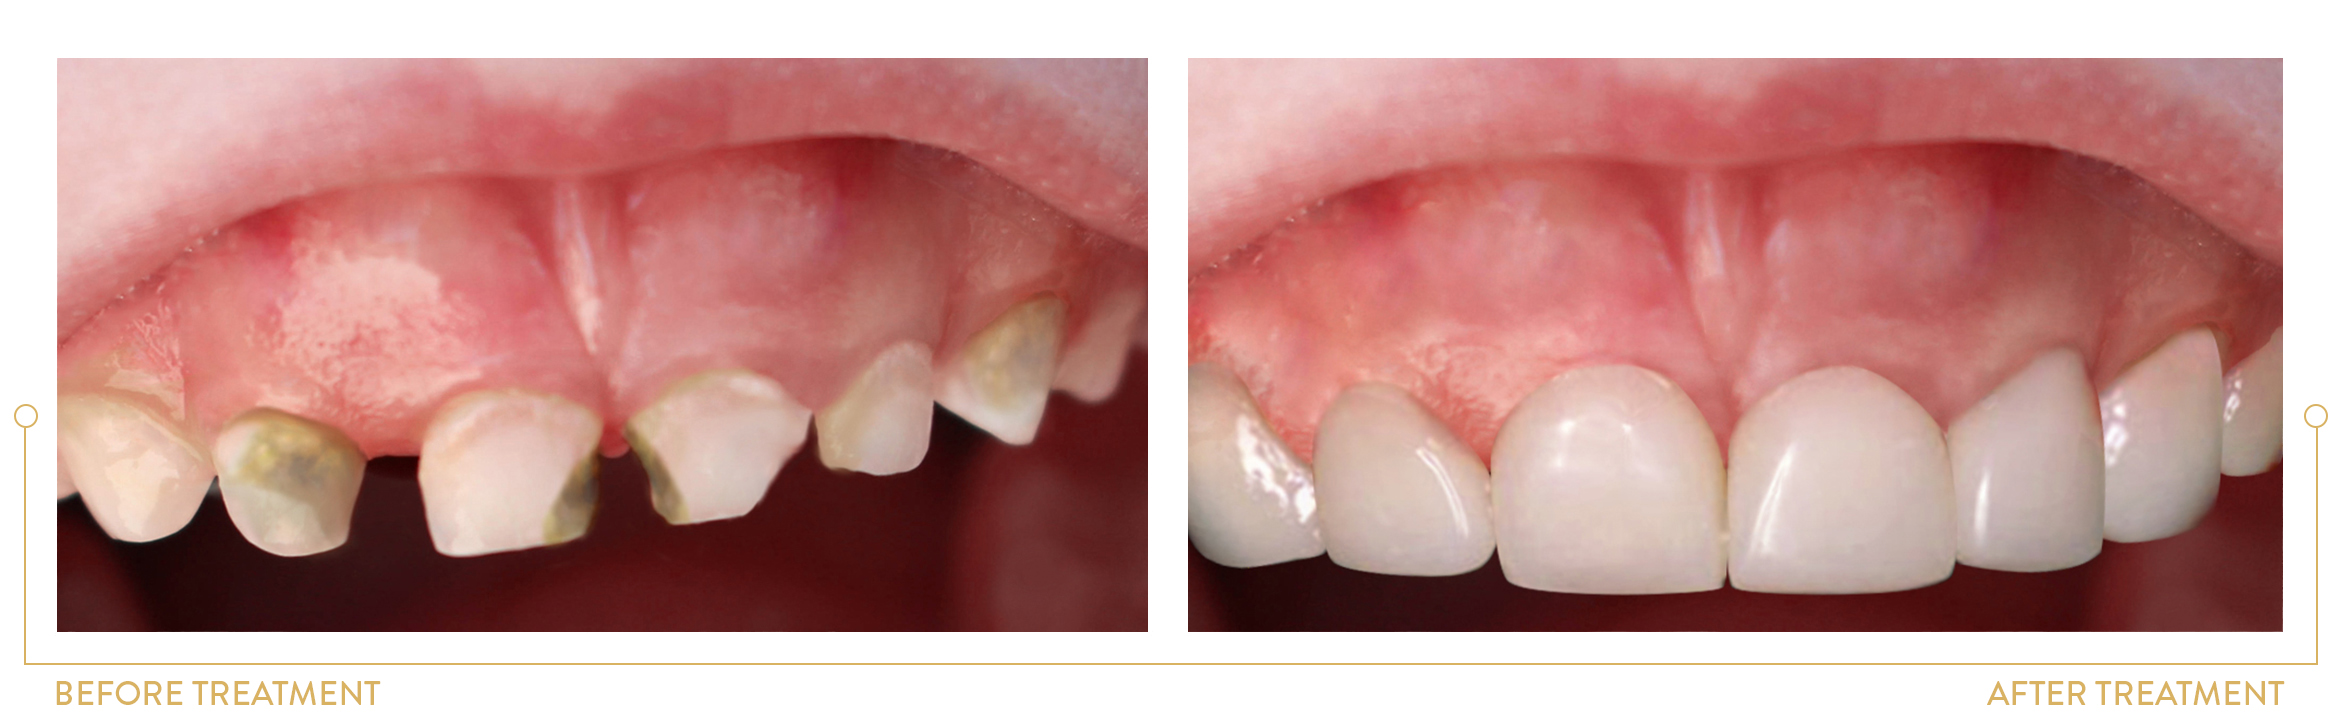 reconstruction of damaged  milk teeth using celluloid crowns